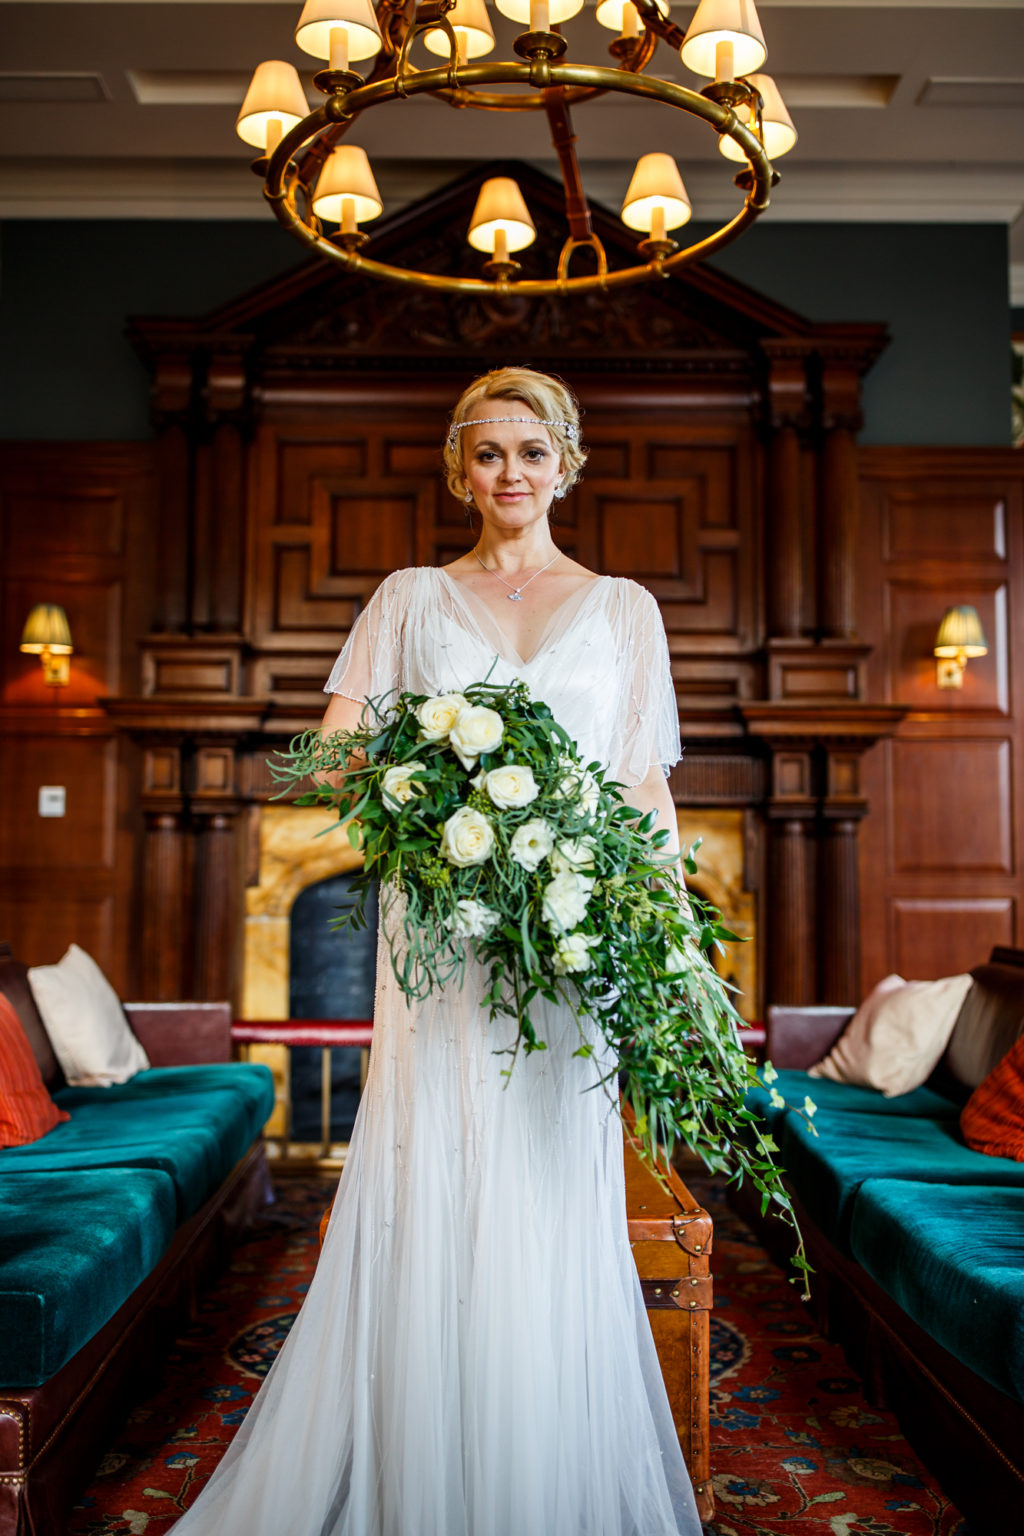 Intimate Wedding At Cambridge Registry Office With 1920s Inspired Wedding Dress